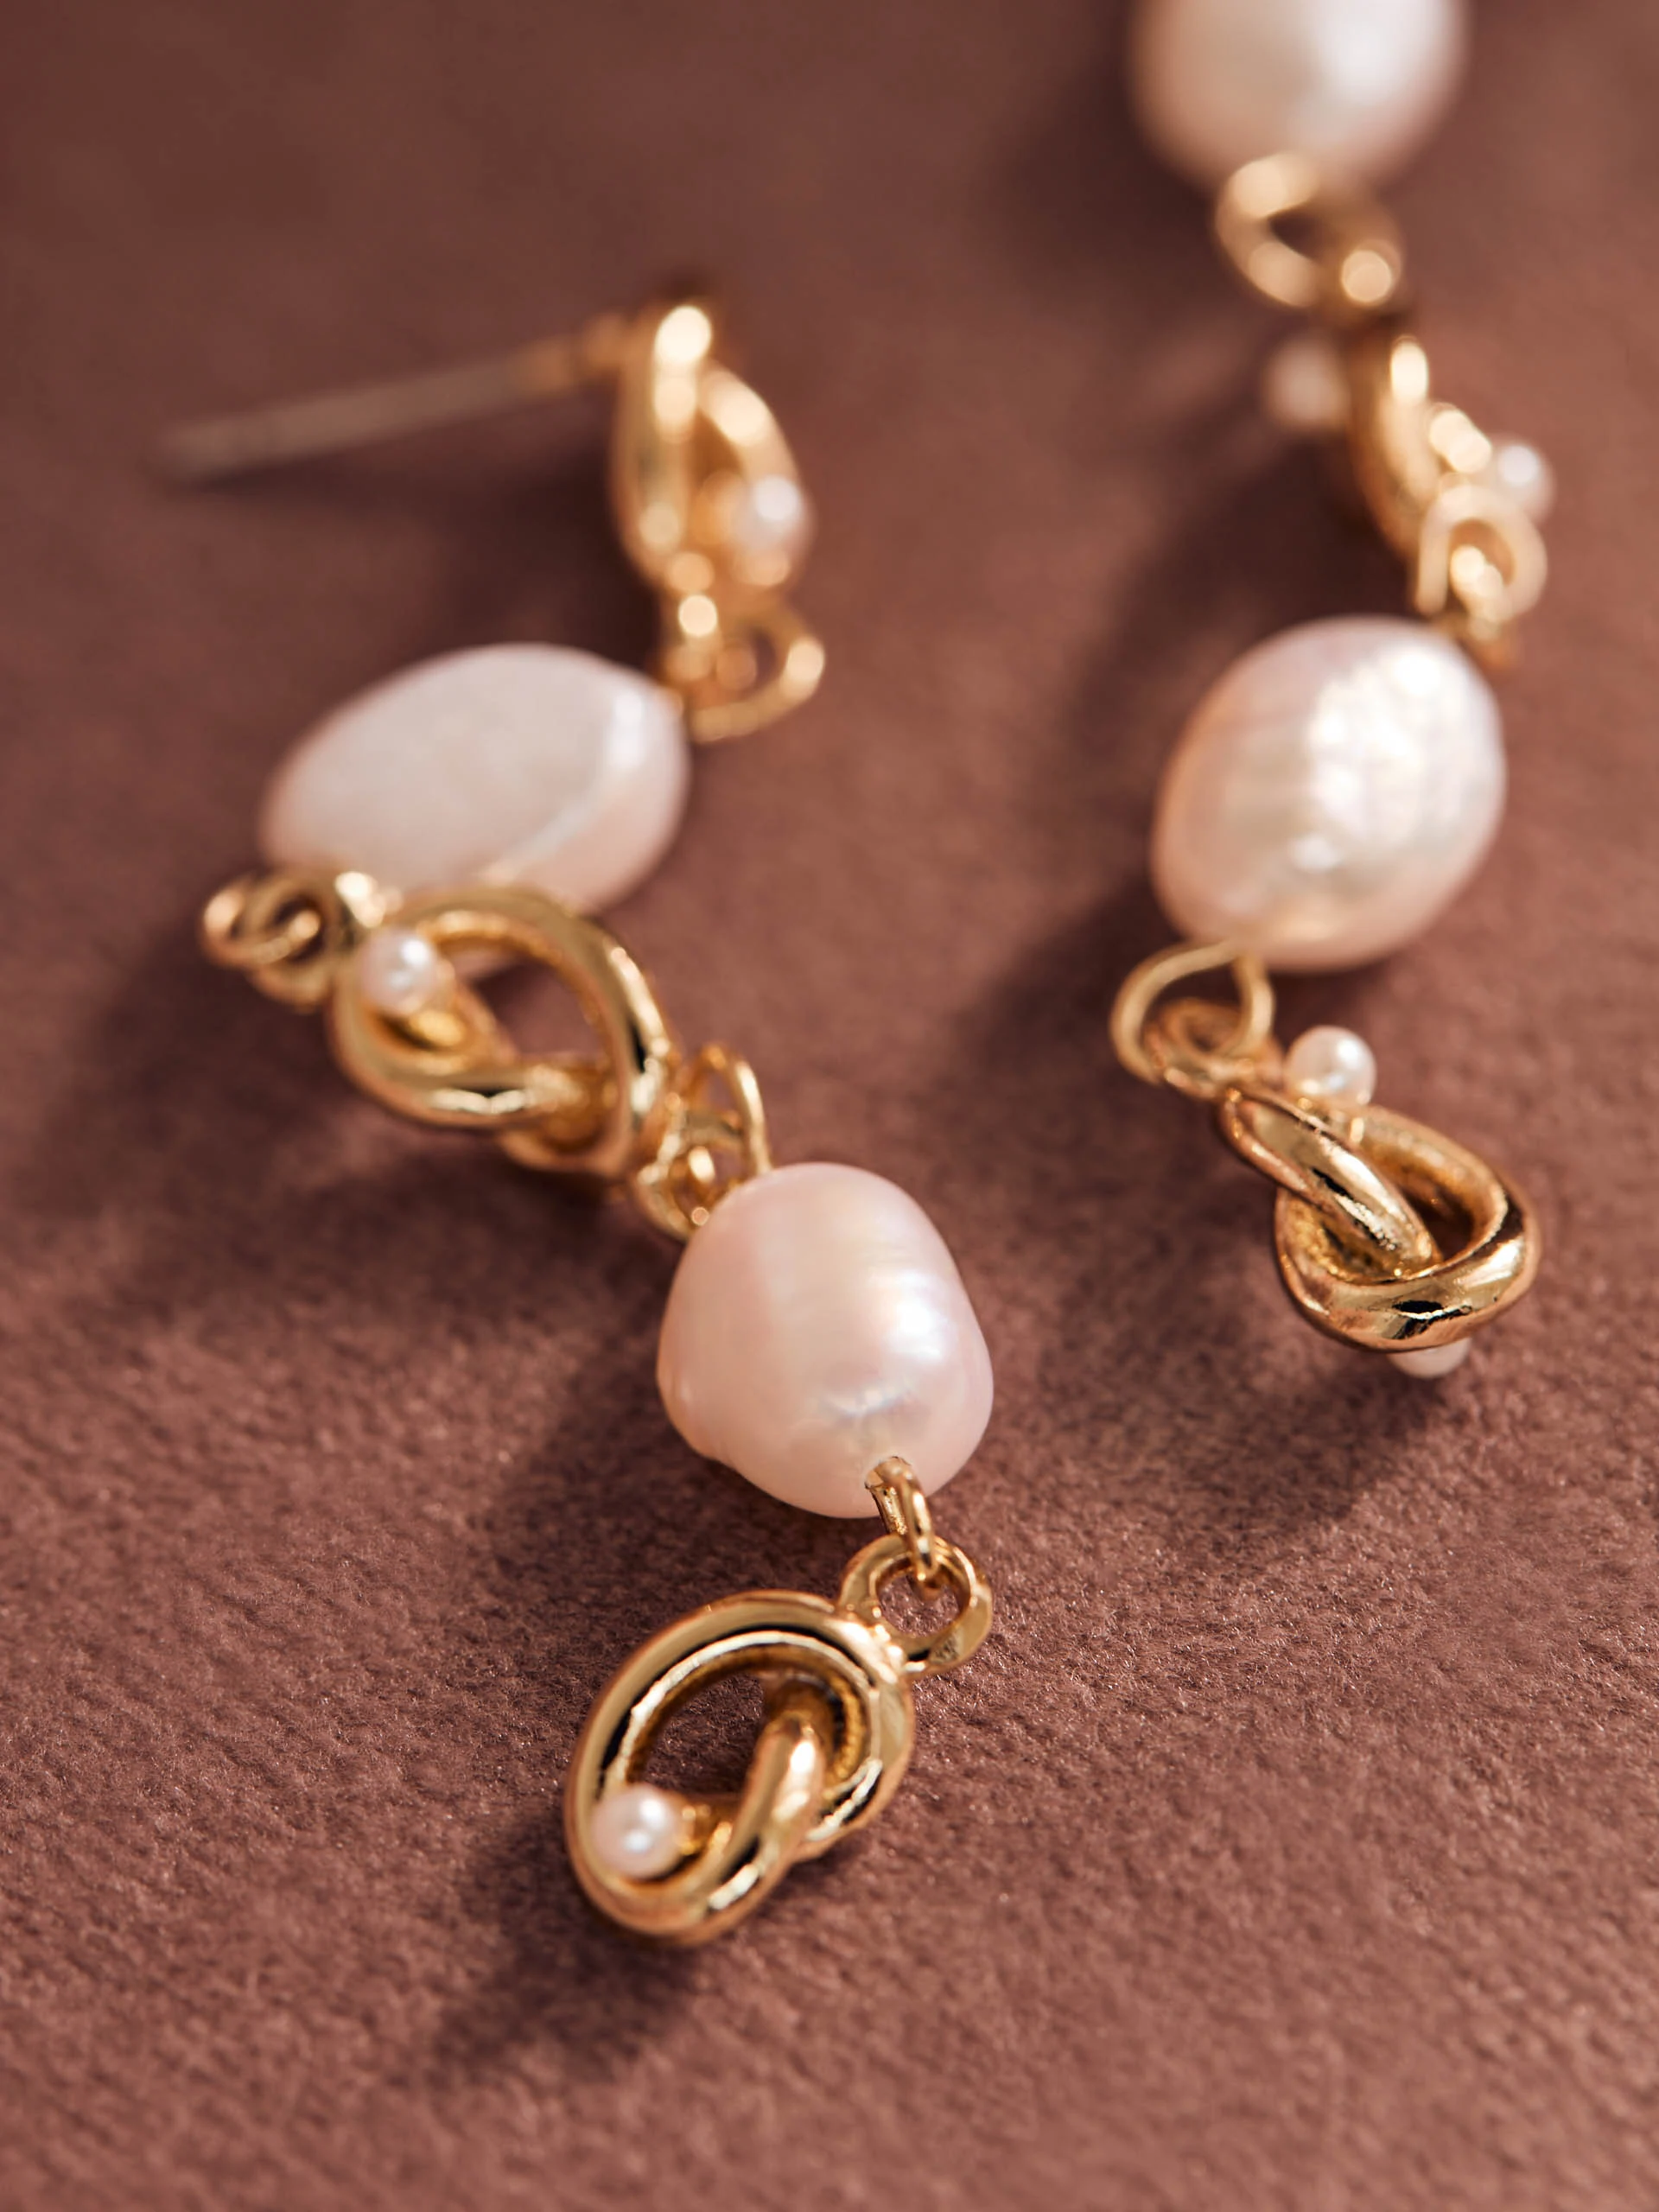 GOLD-PLATED EARRINGS WITH PEARLS